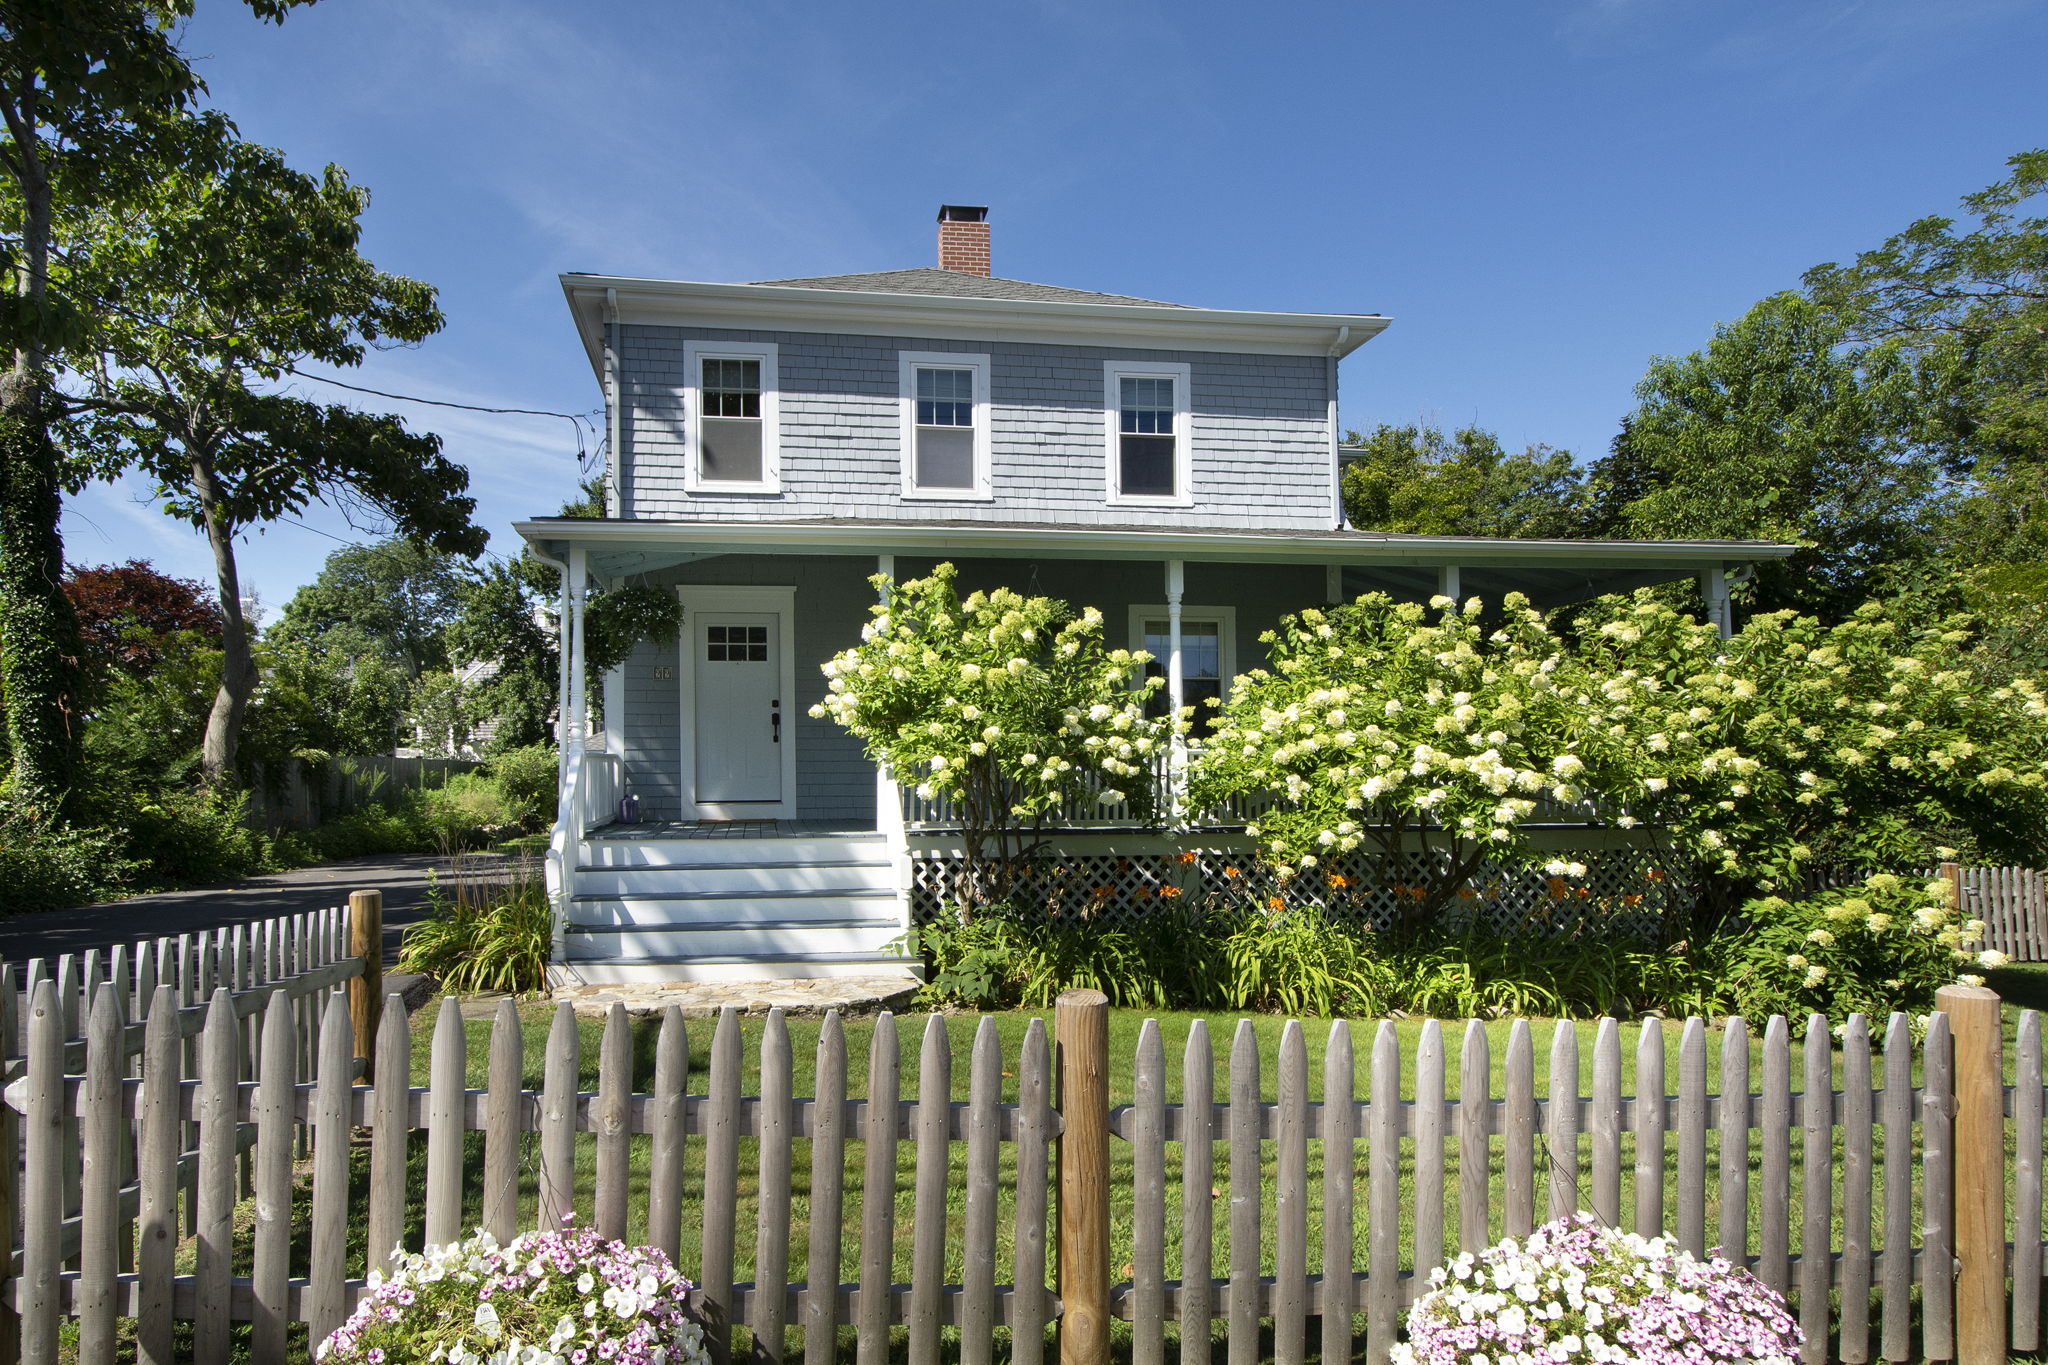  99 Hatherly Rd, Scituate, MA 02066, US